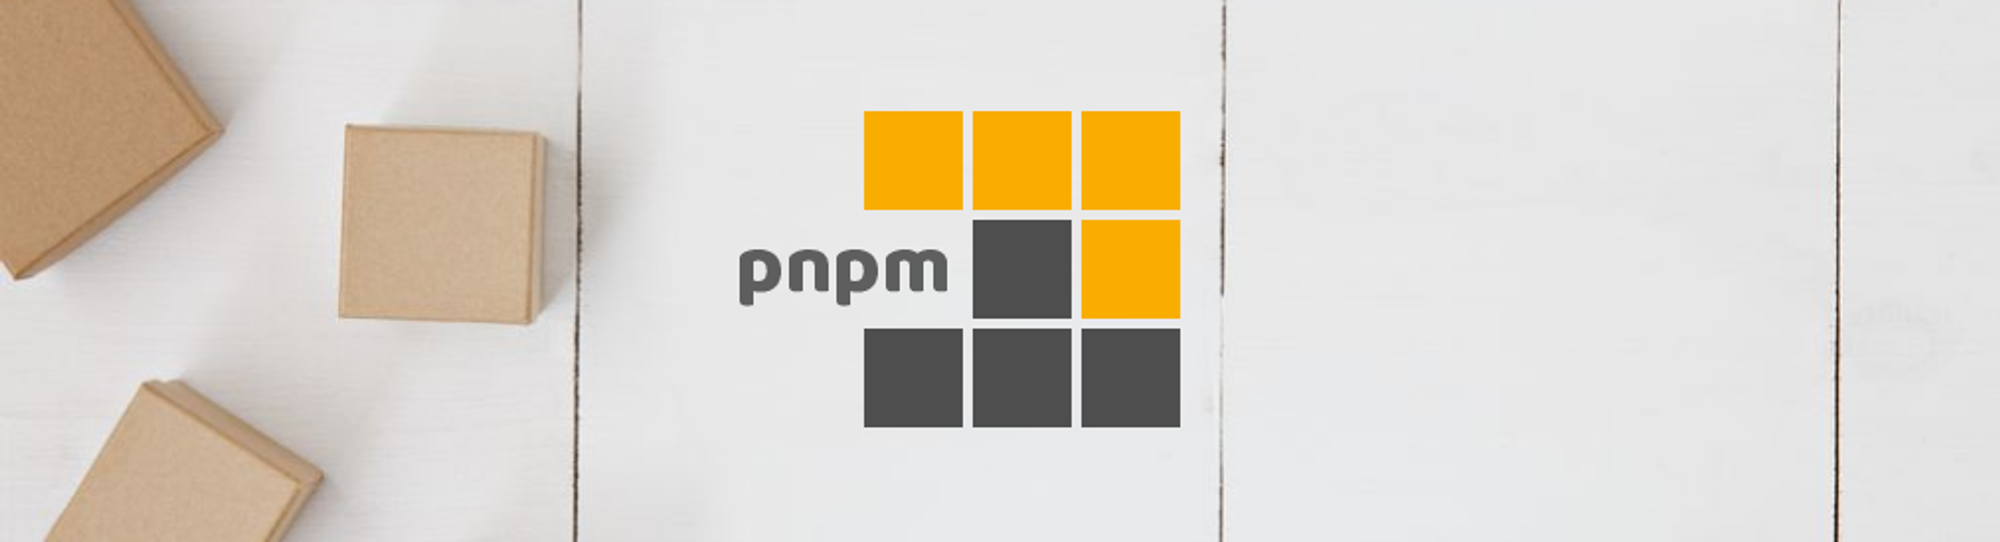 How to migrate a project from npm to pnpm